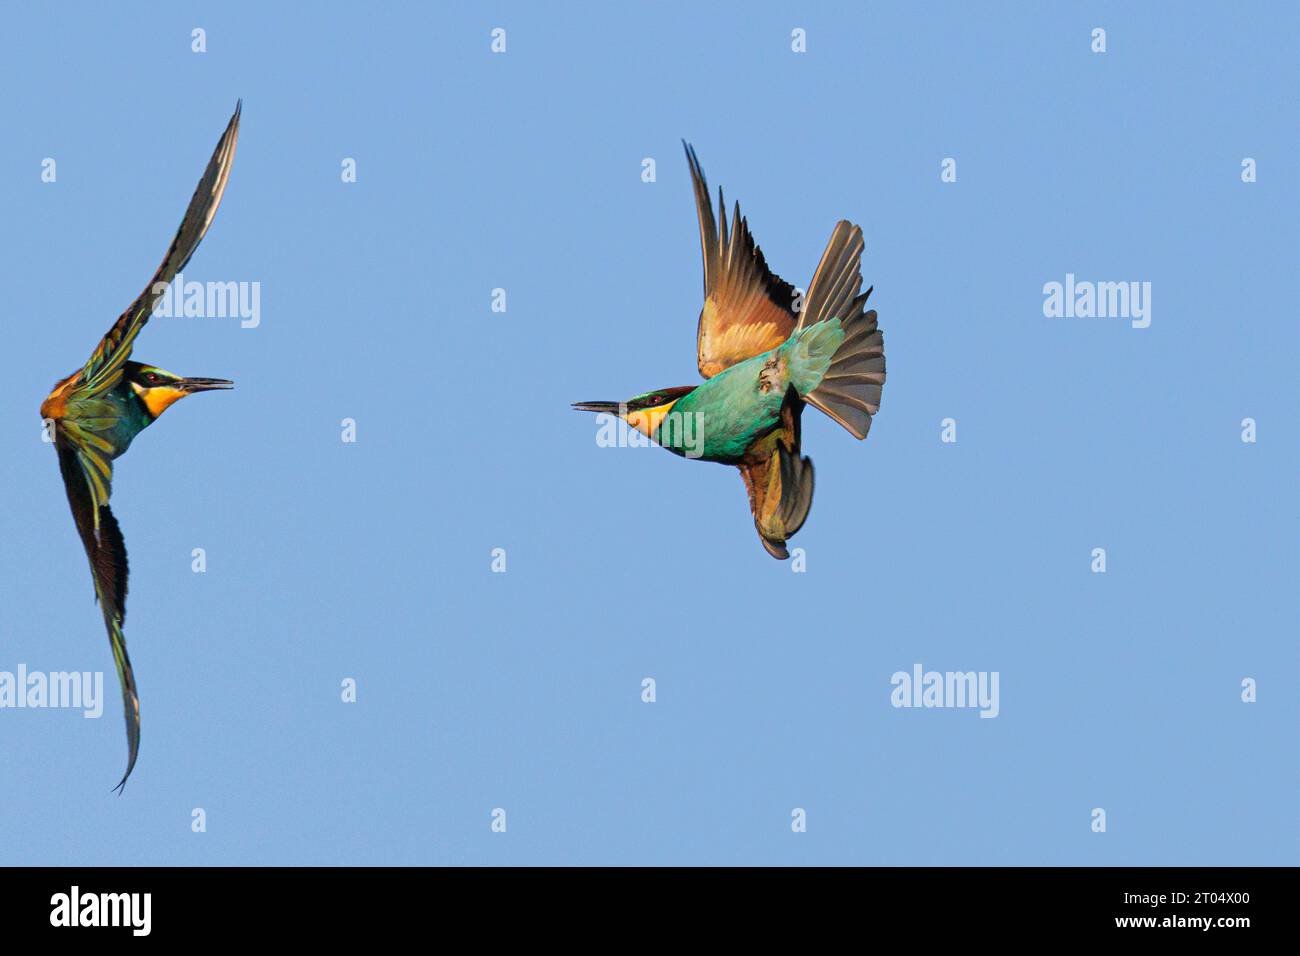 European bee eater (Merops apiaster), two bee eaters attacking in flight, Germany, Bavaria Stock Photo